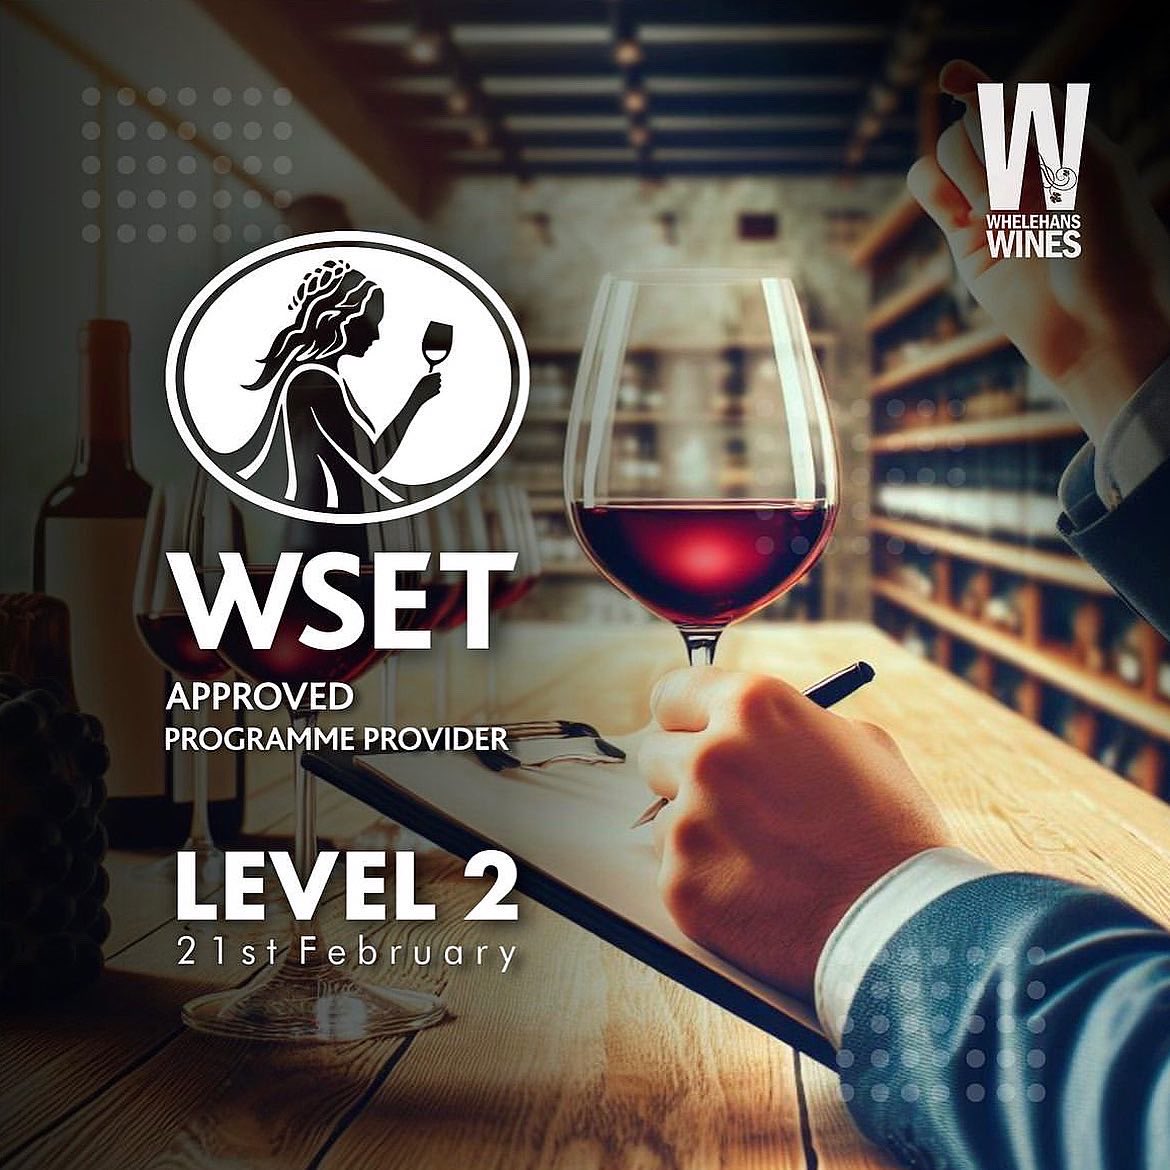 Want to improve your knowledge of #wine for business or pleasure?
@Whelehanswines are about to begin a @WSETglobal Level 2 course. They cater for all levels of learning at their wine school in south Dublin from enthusiasts to those working in #hospitality 🥂 #wineeducation